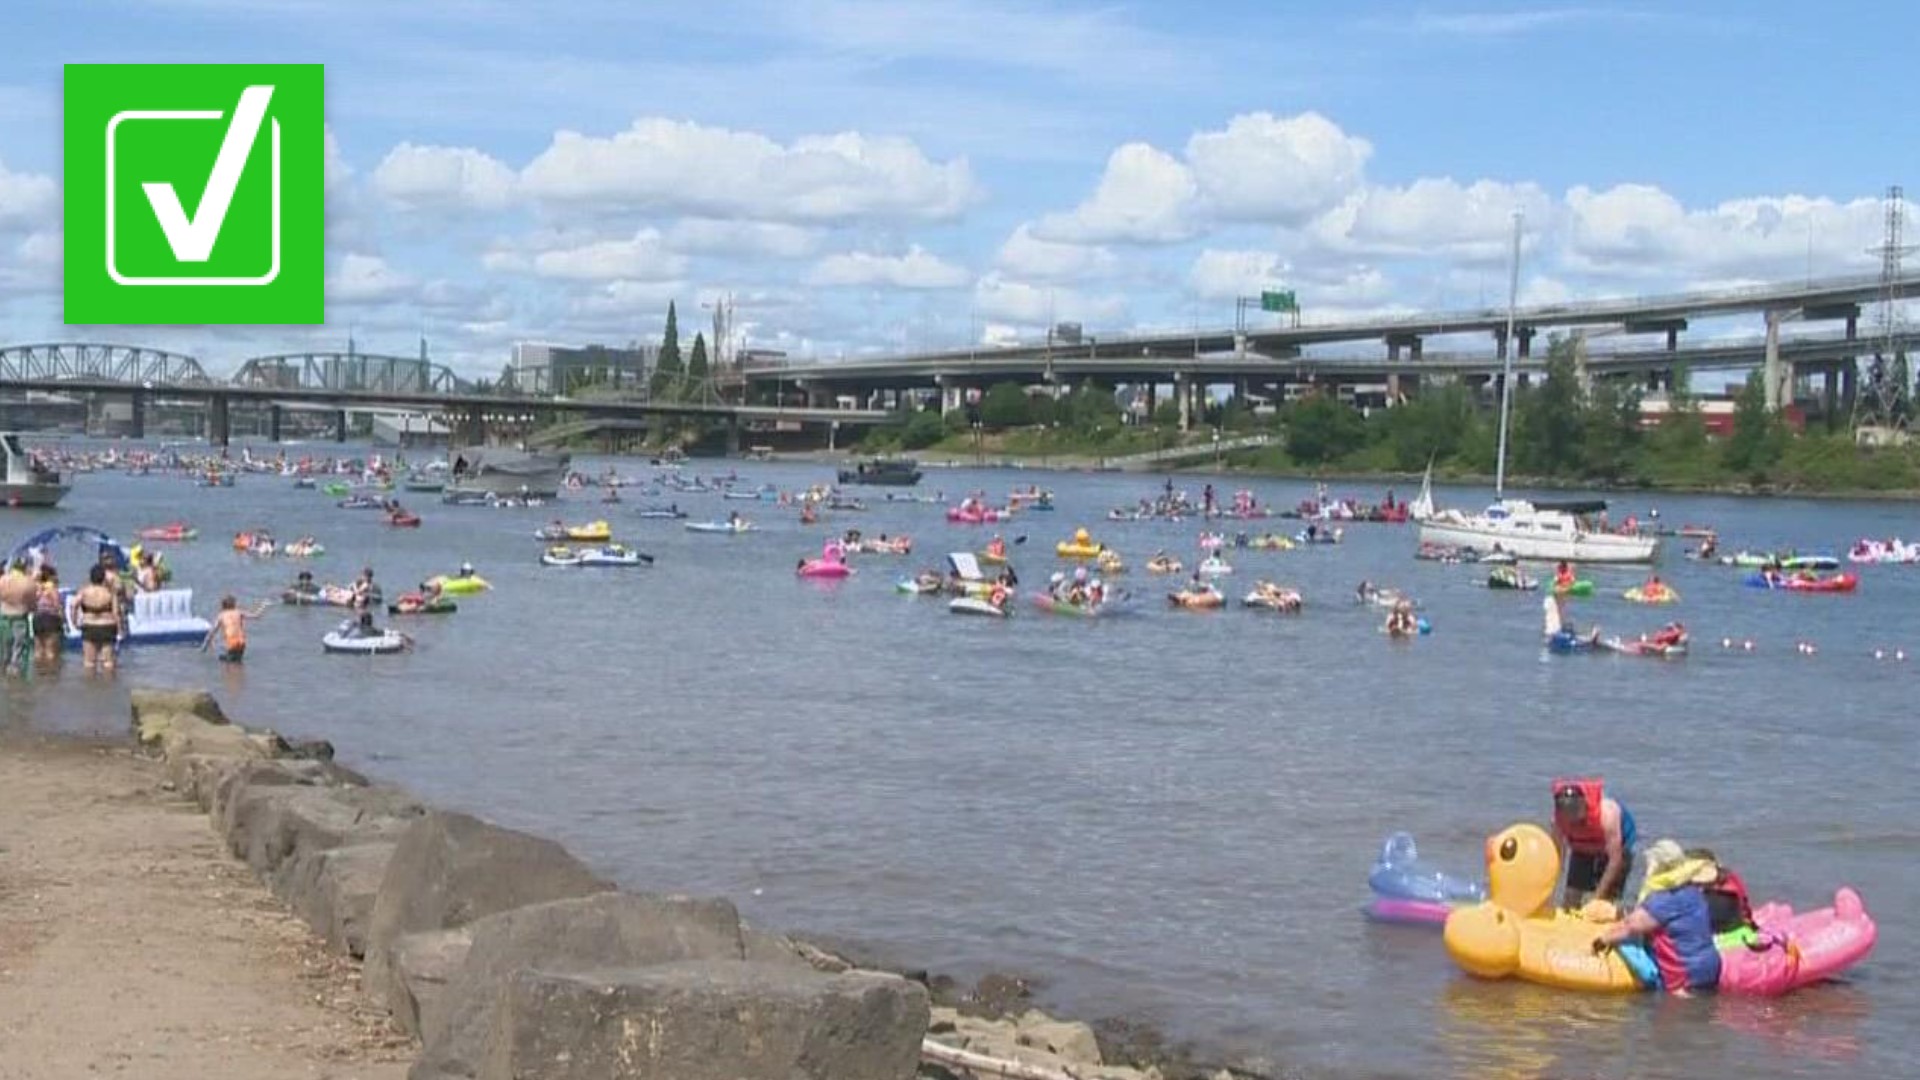 Yes, it is safe to swim in the Willamette River in Portland